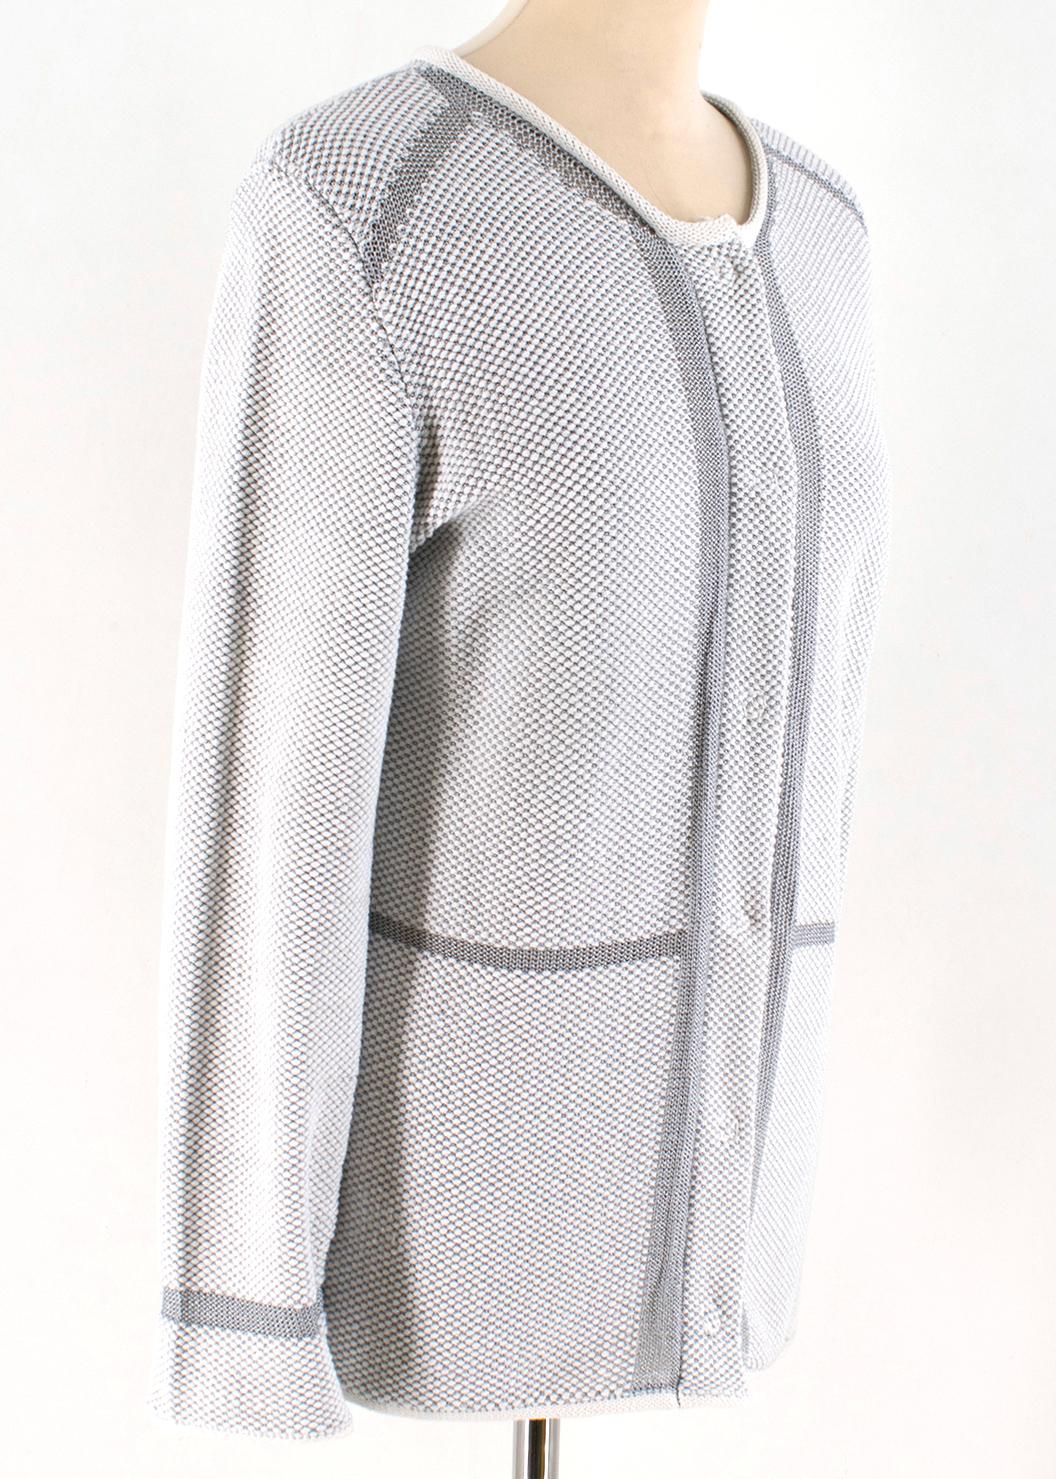 Armani Collezioni Woven Tweed Cardigan

- Finely Woven Cardigan, excellent for warmth and stylish
- Excellent, secure button fastening. As well as hidden buttons when fastened. 
- Woven tweed
- White lining at collar & cuffs
- Extremely soft fabric